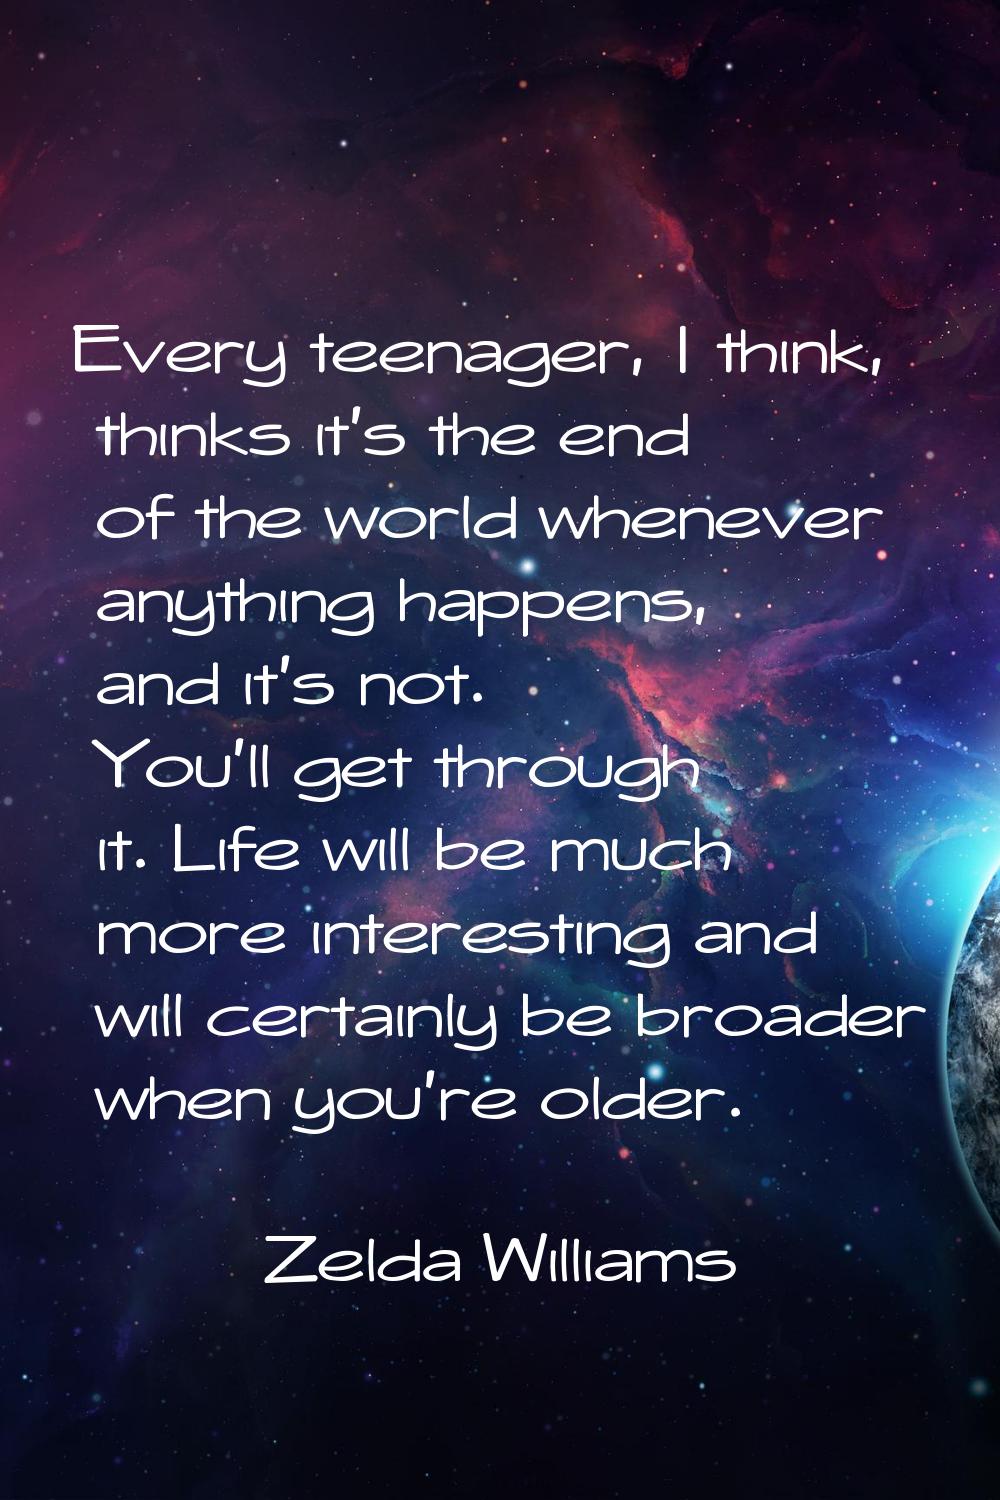 Every teenager, I think, thinks it's the end of the world whenever anything happens, and it's not. 